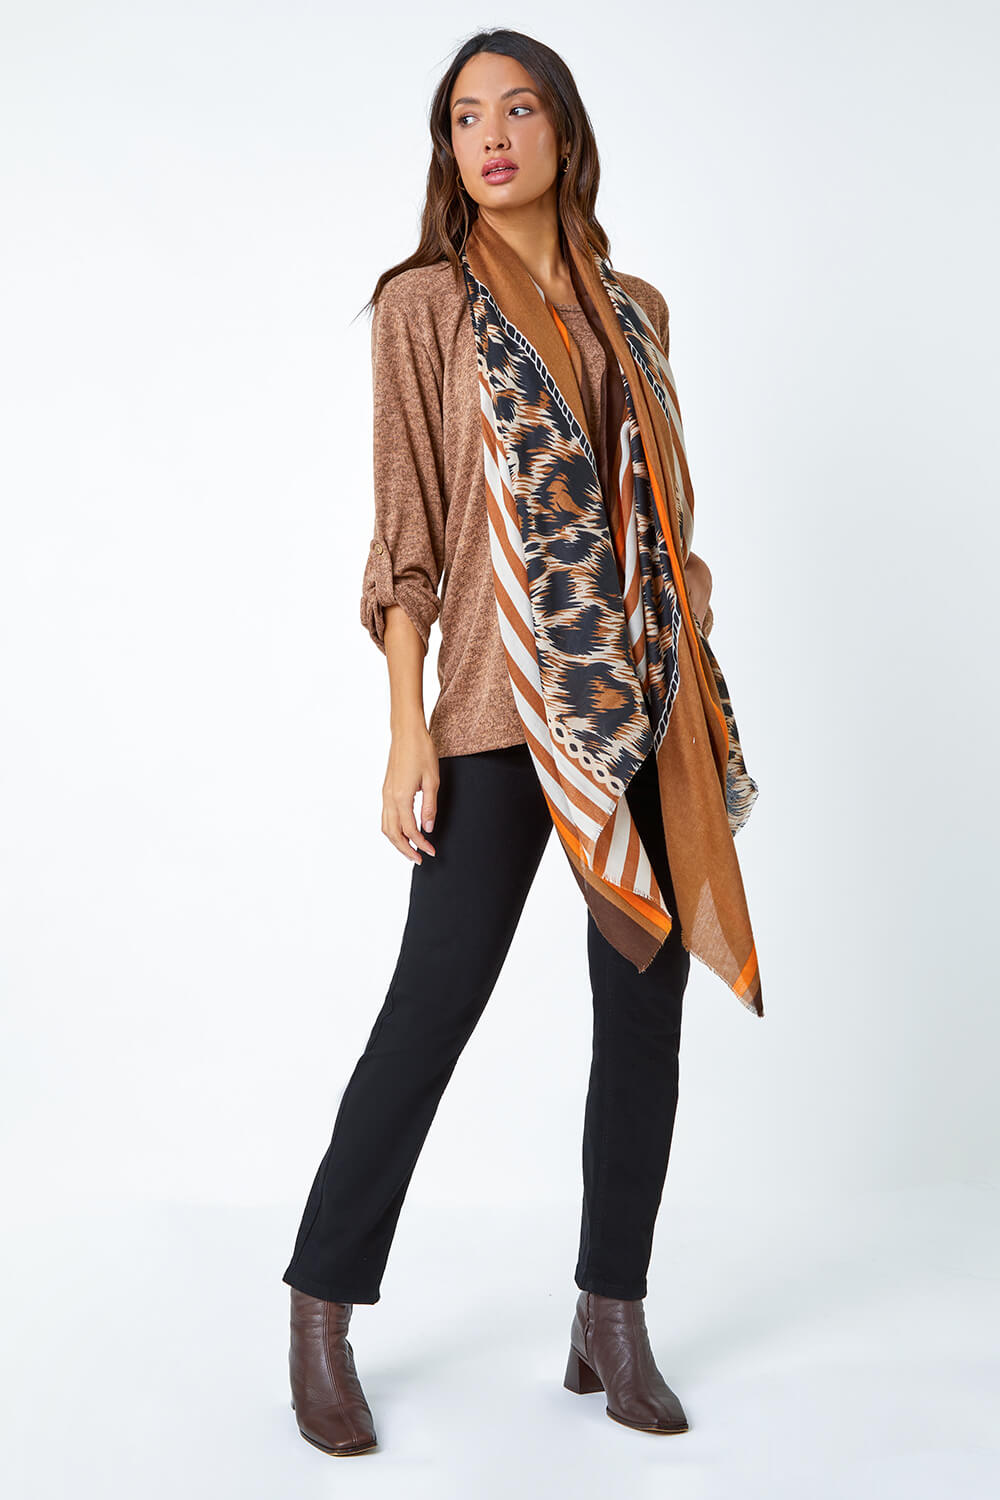 Camel  Stretch Top with Animal Print Scarf, Image 2 of 5